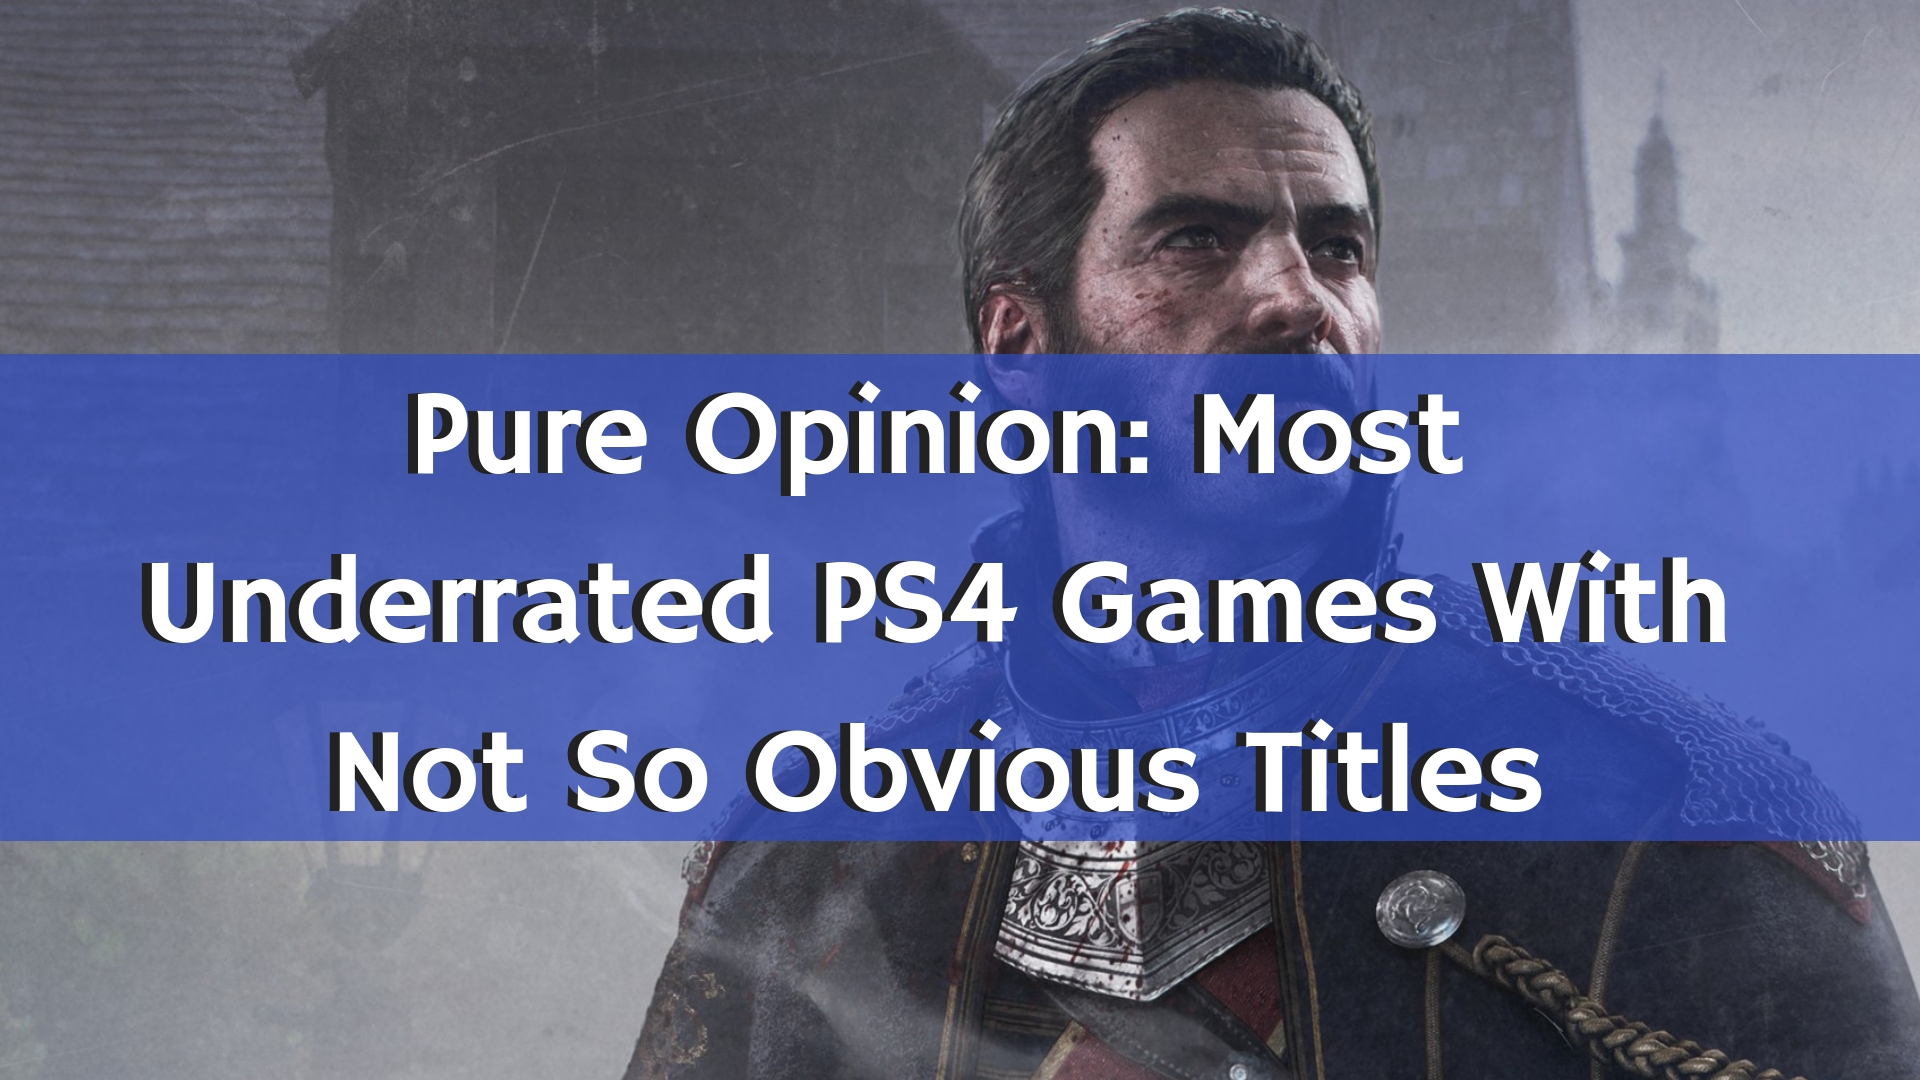 Pure Opinion: Most Underrated PS4 Games With Not So Obvious Titles